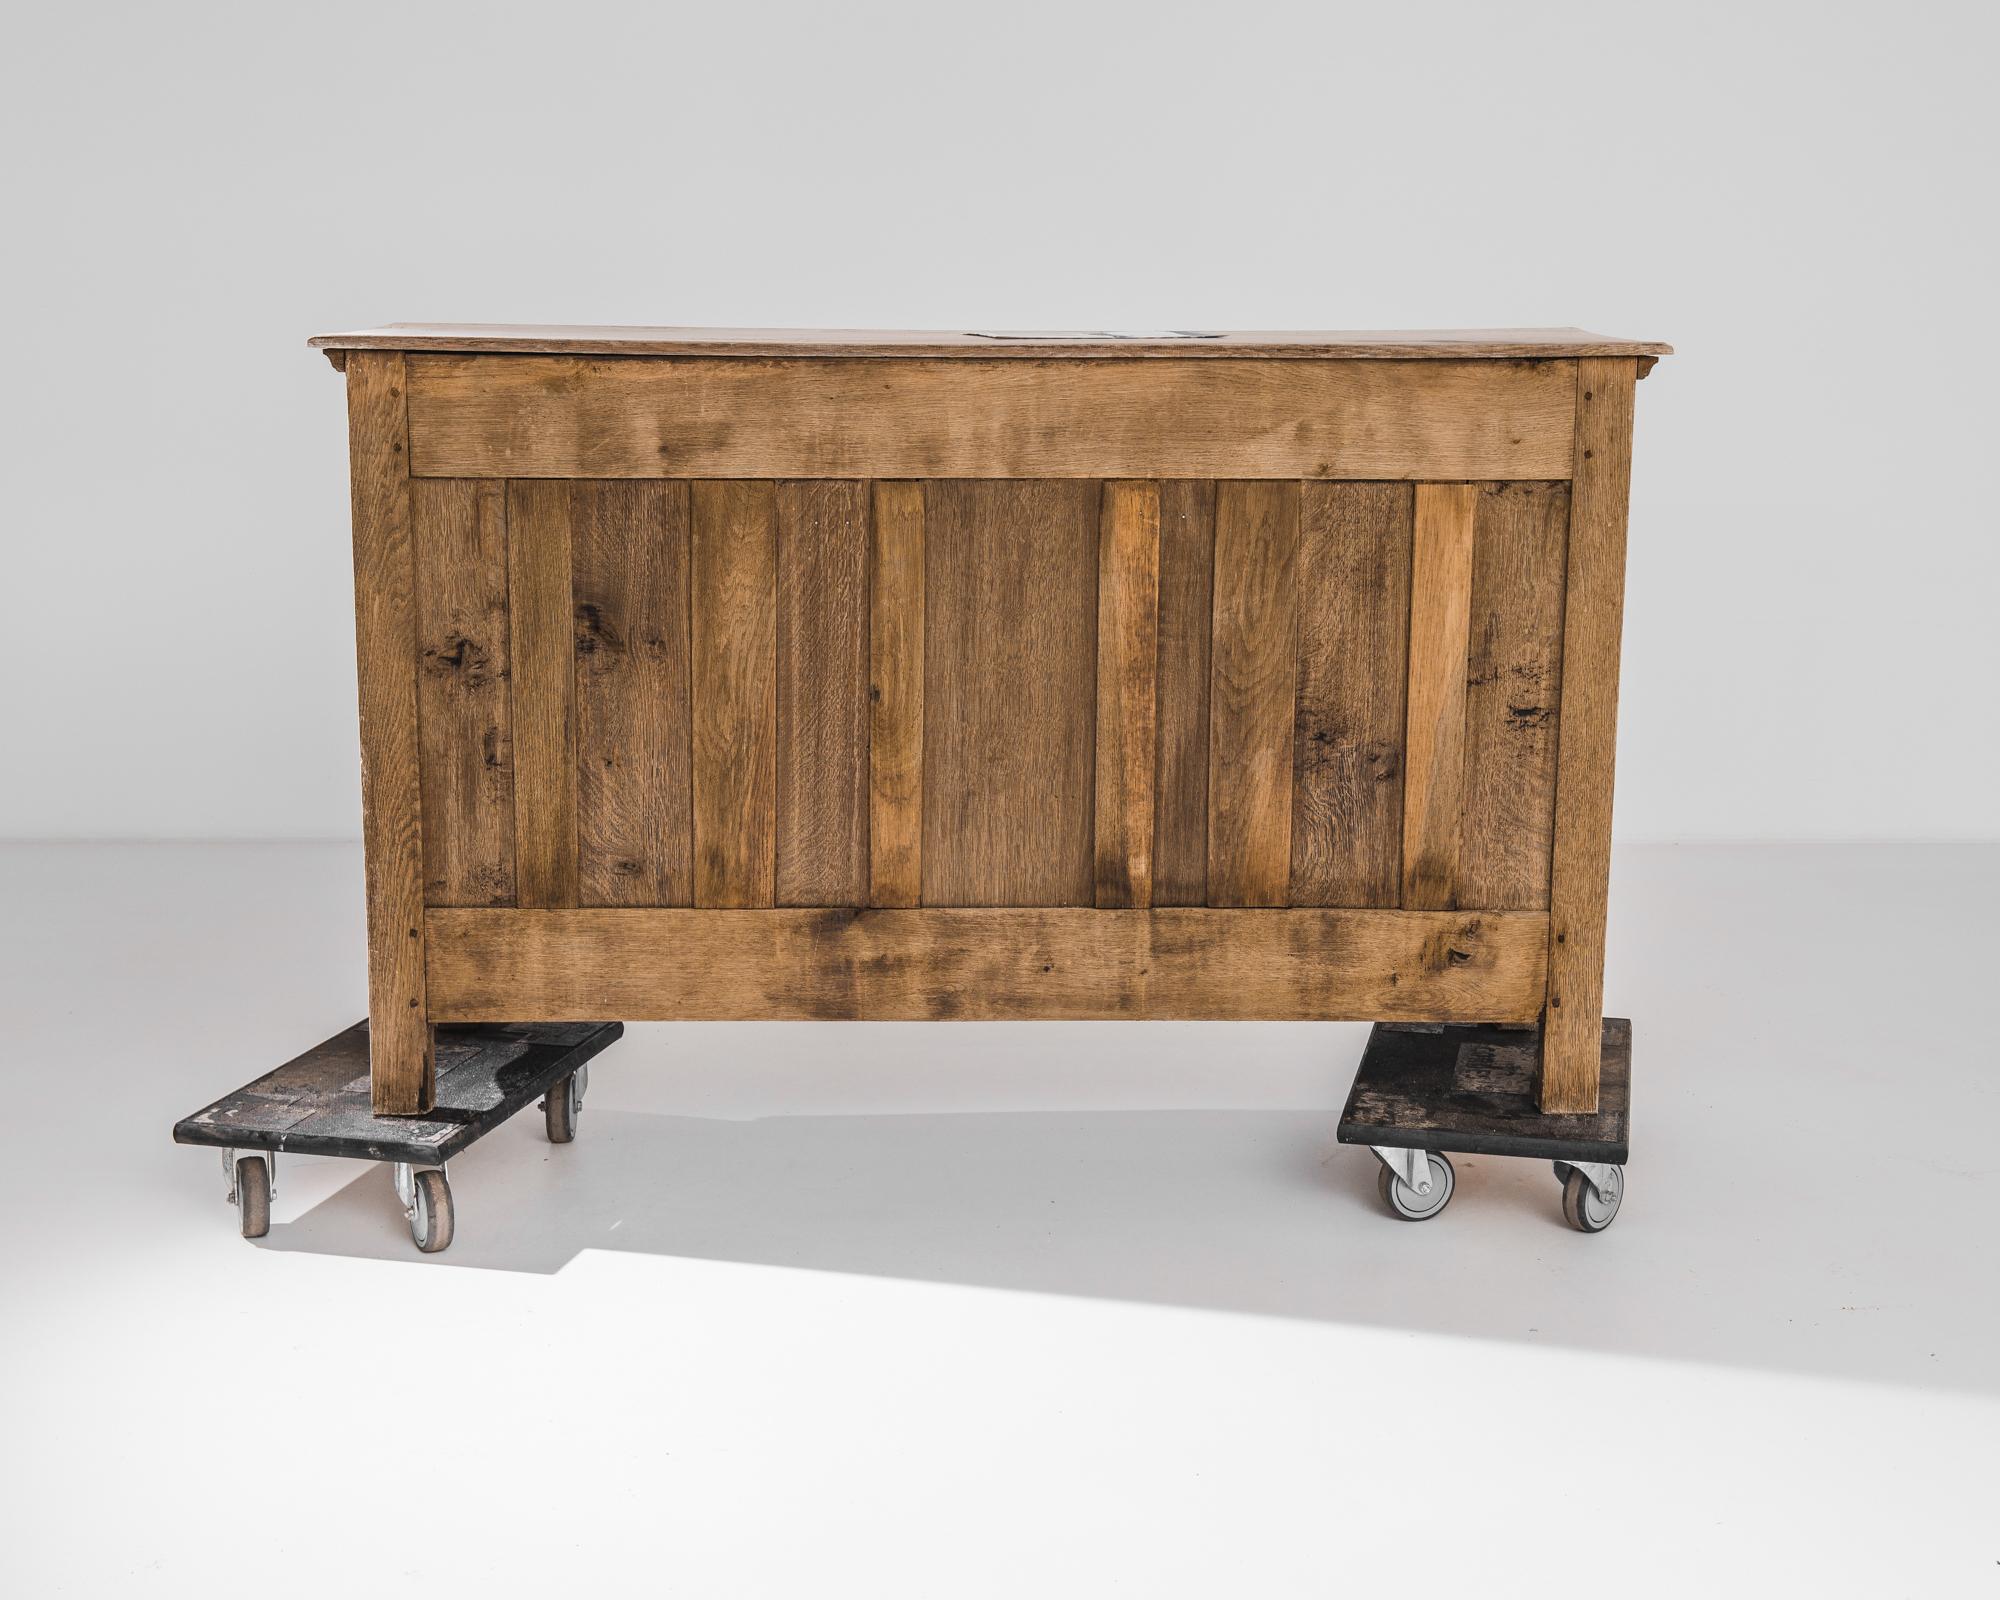 An oak buffet from 1820s France. Expressive panelling on the cupboard doors is echoed in the curves of the scalloped apron and carved central motif. The bright russet tone of the restored oak gives a fresh finish to this antique piece; gilded drawer